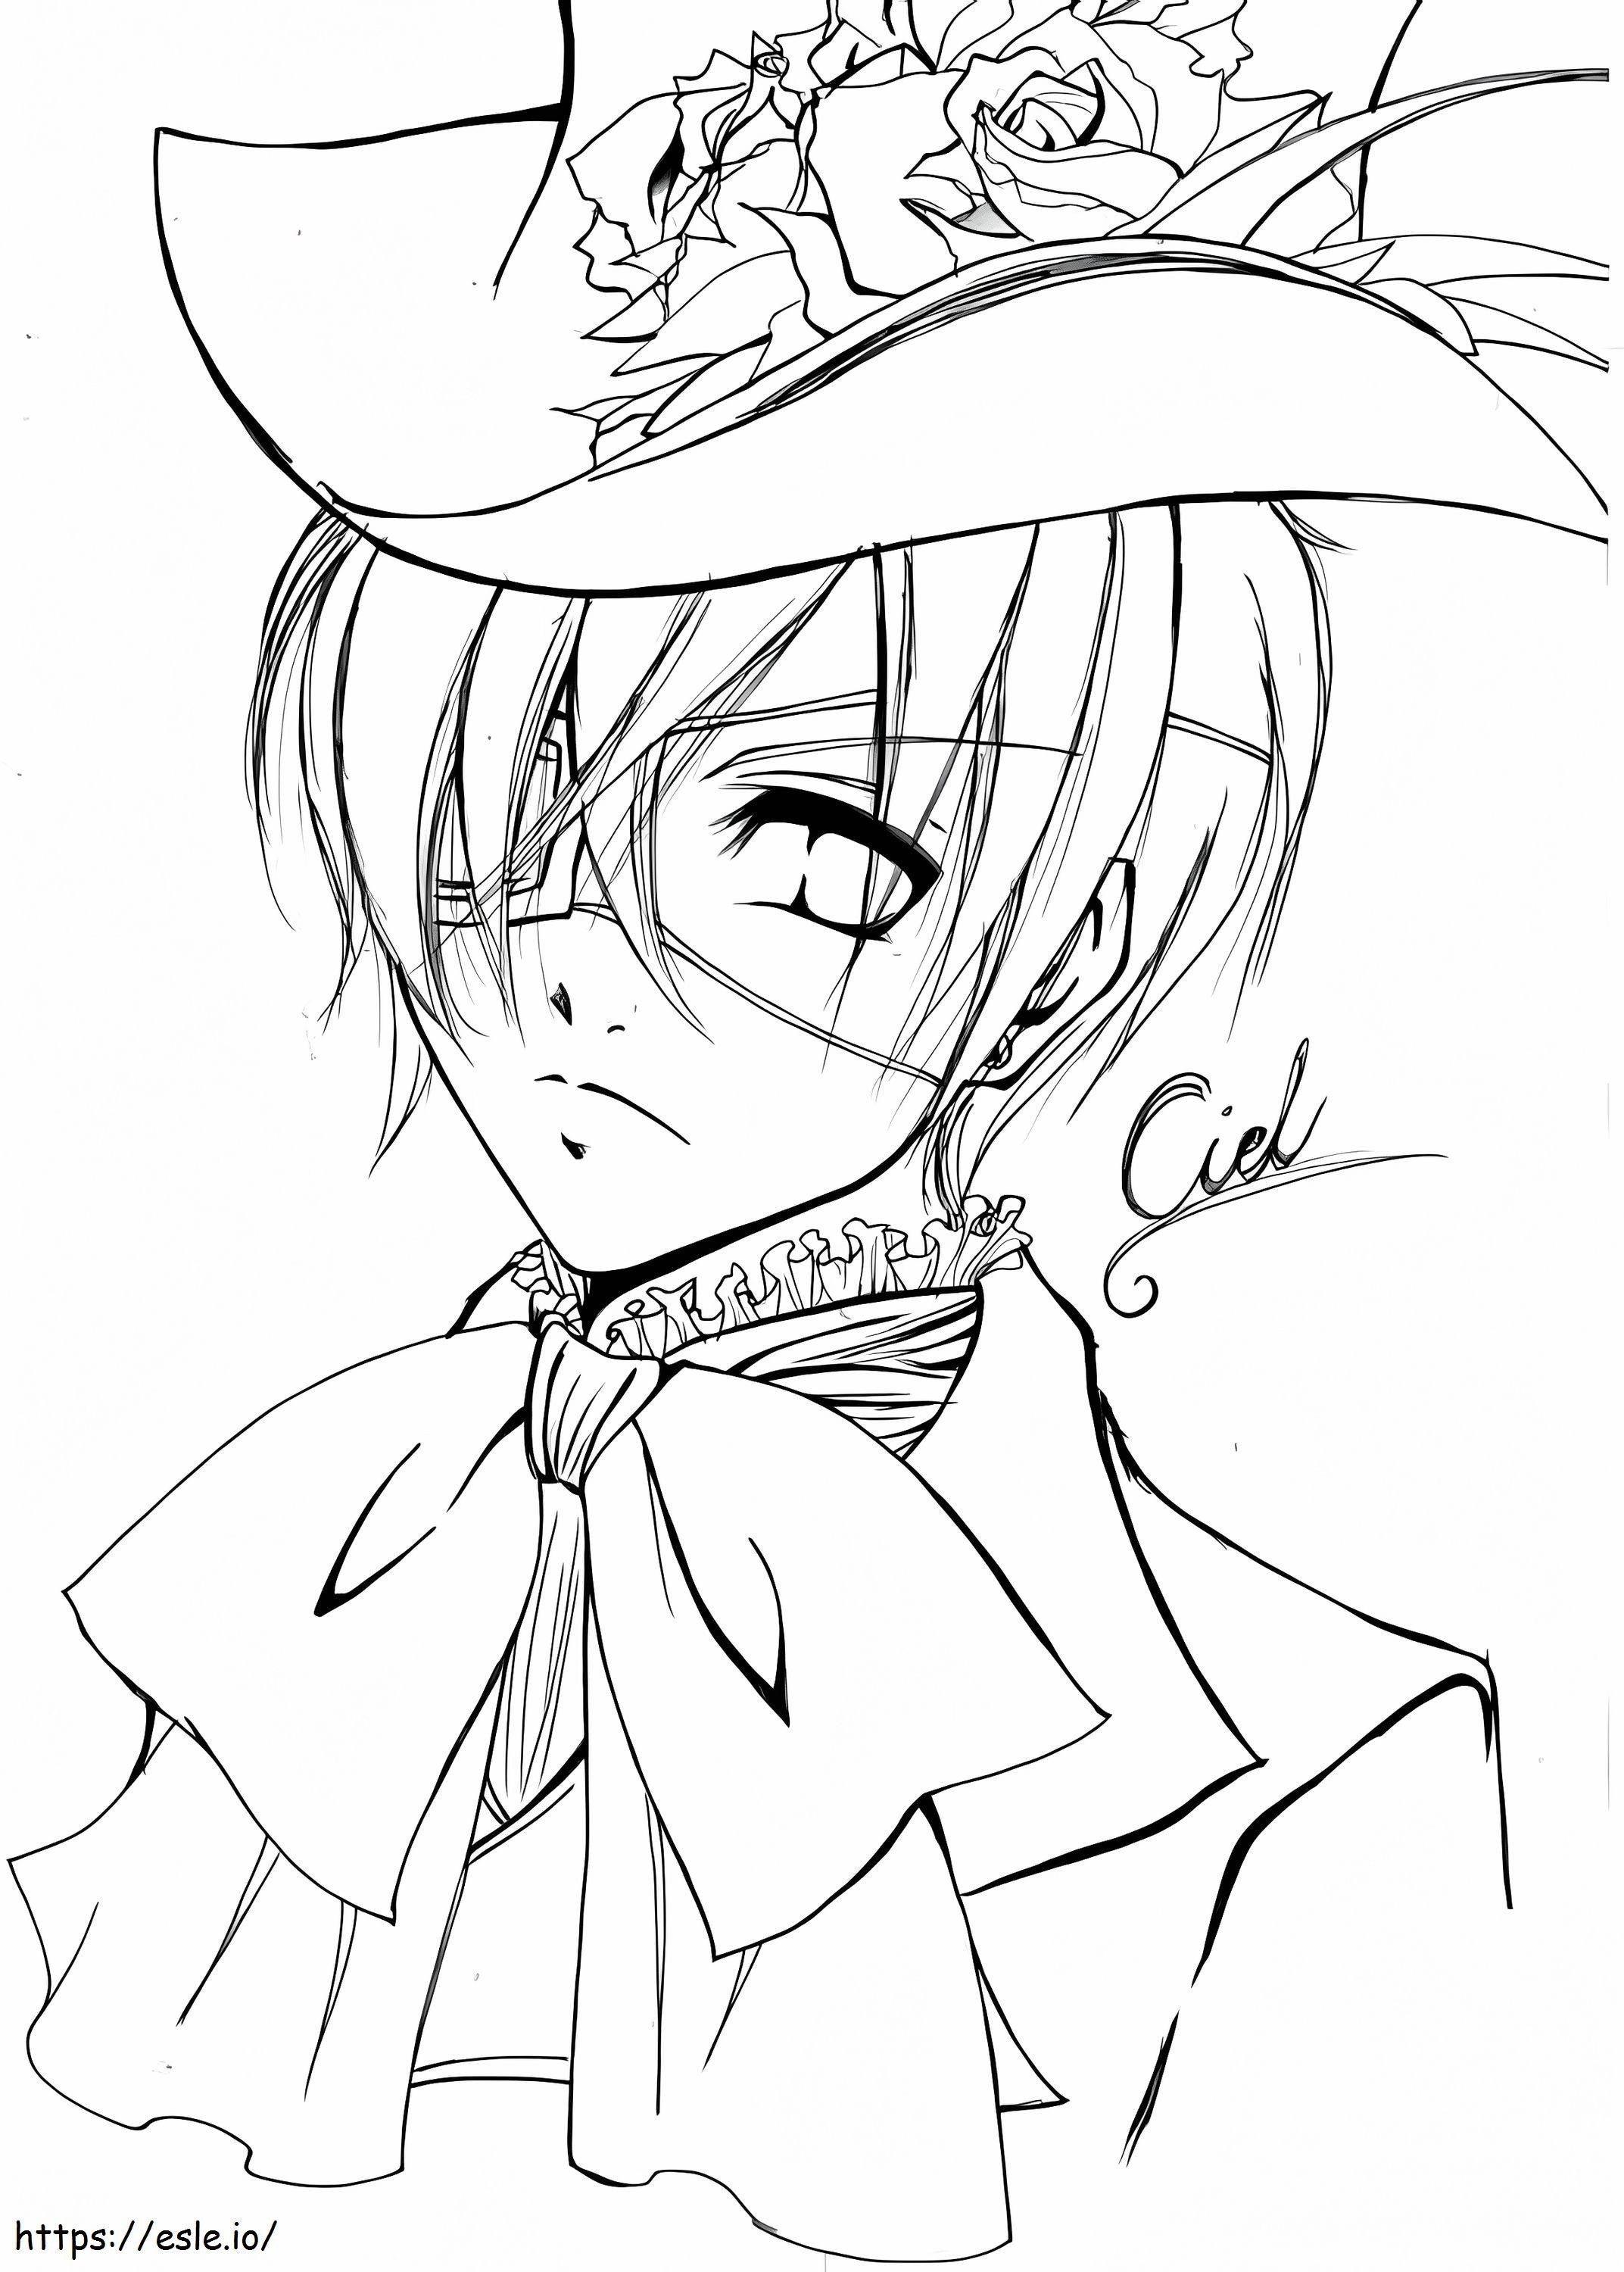 Ciel Phantomhive From Black Butler coloring page